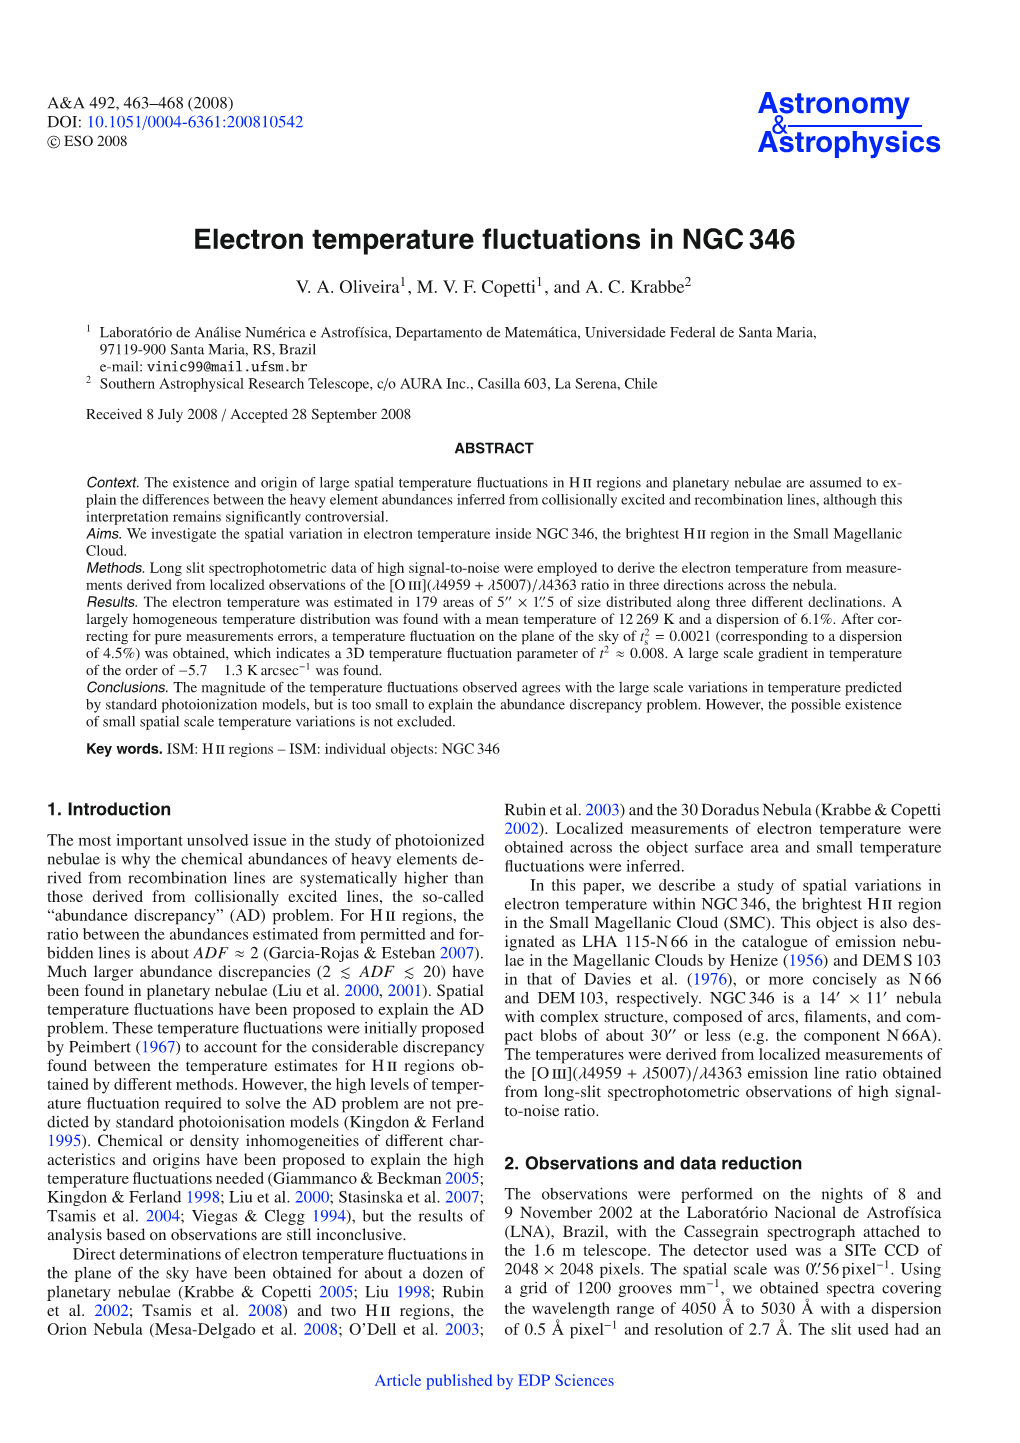 Electron Temperature Fluctuations in NGC